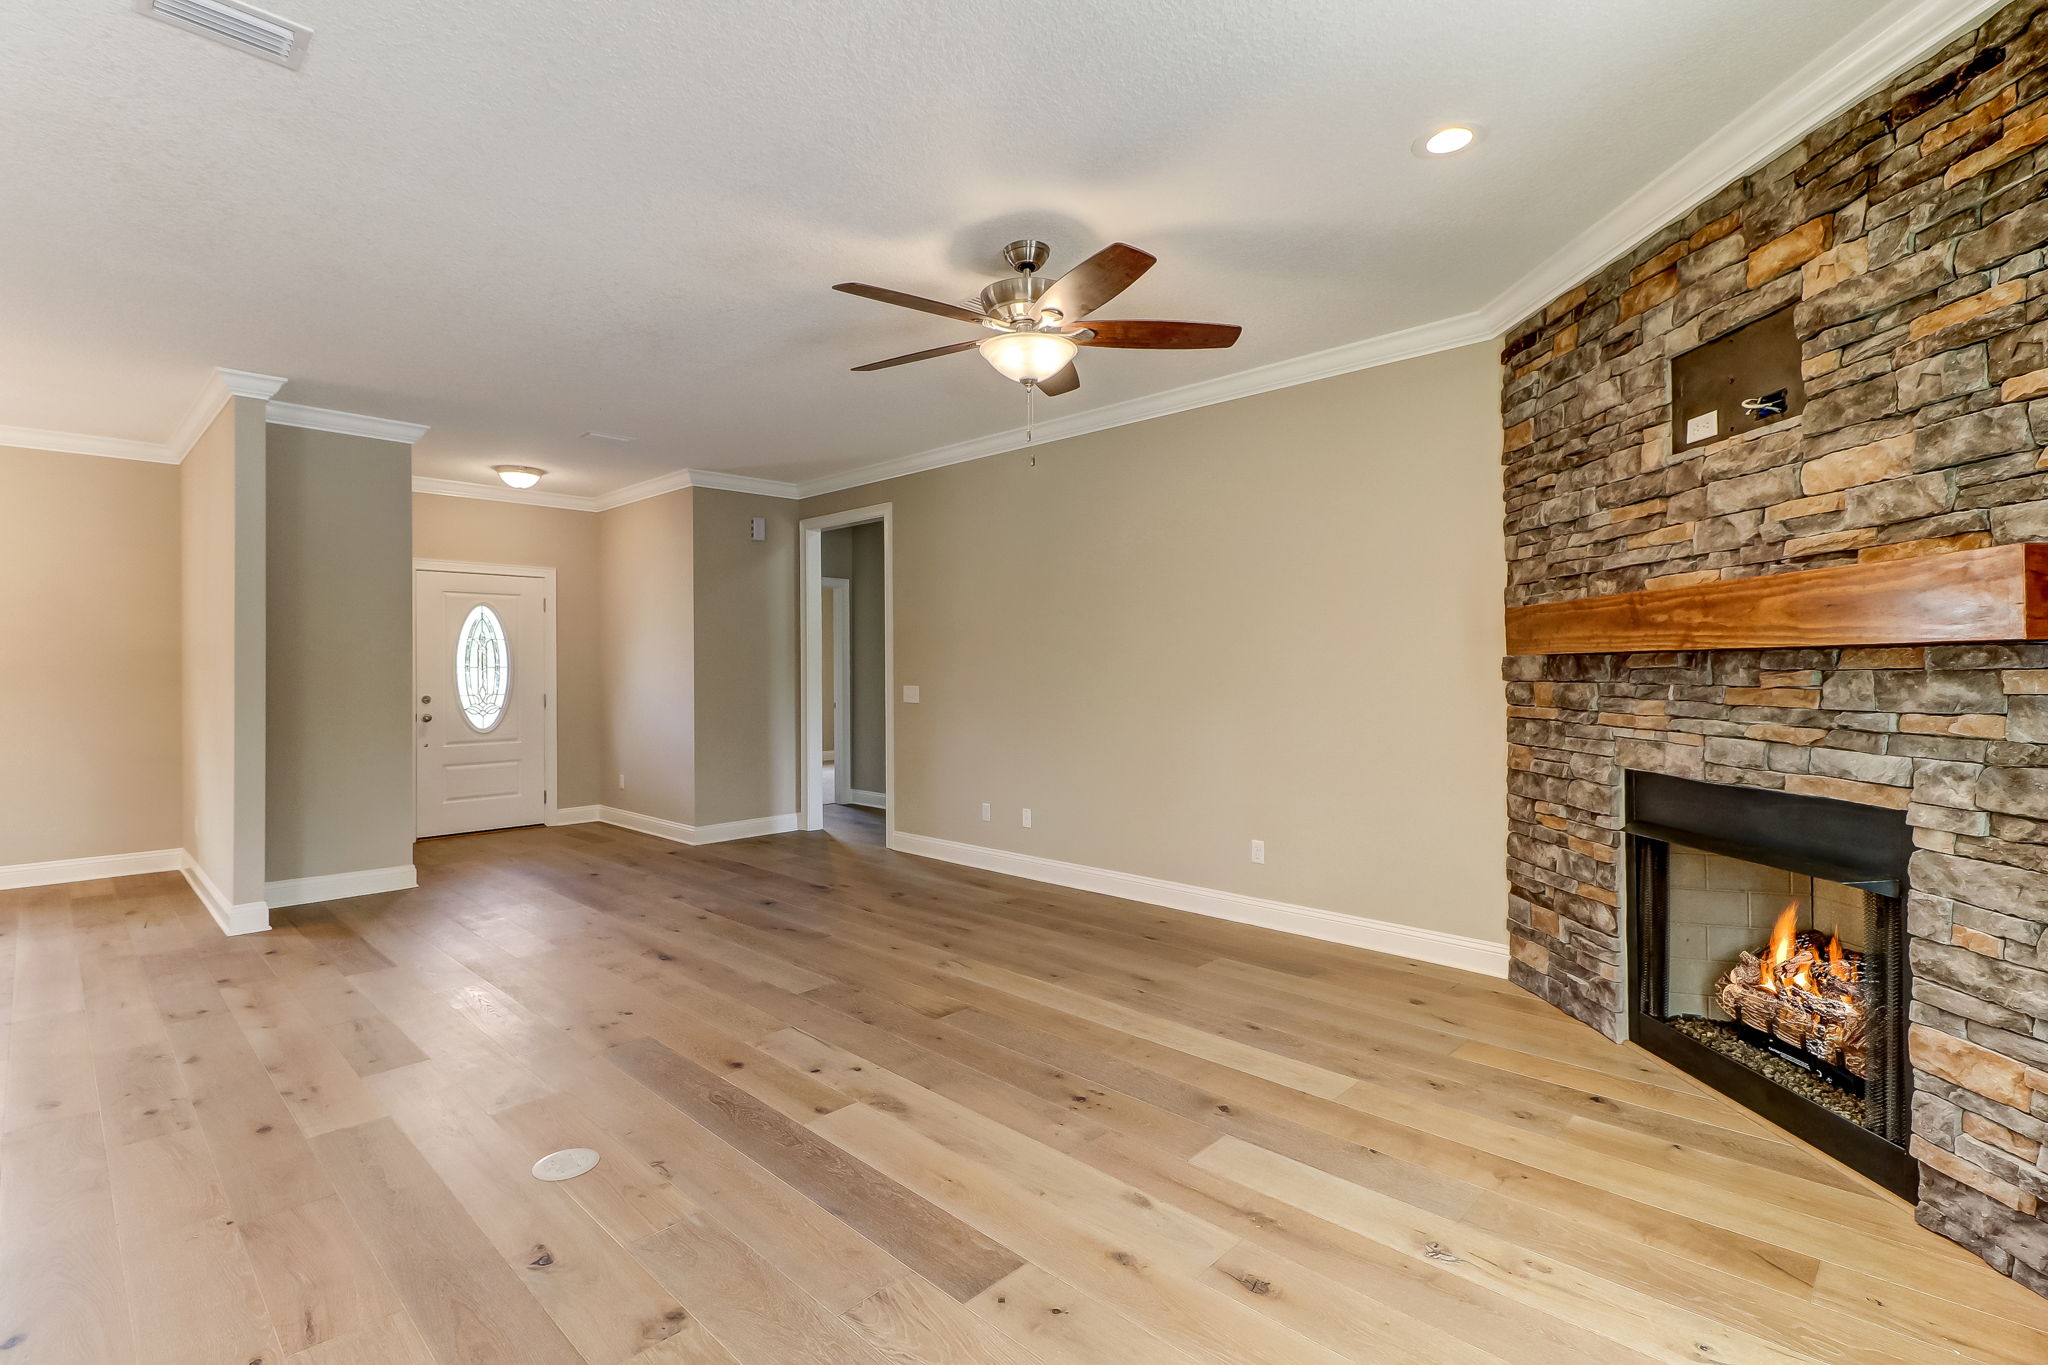 Neutral paint, 9 ft ceilings, and crown moulding add a special touch to the open concept living.